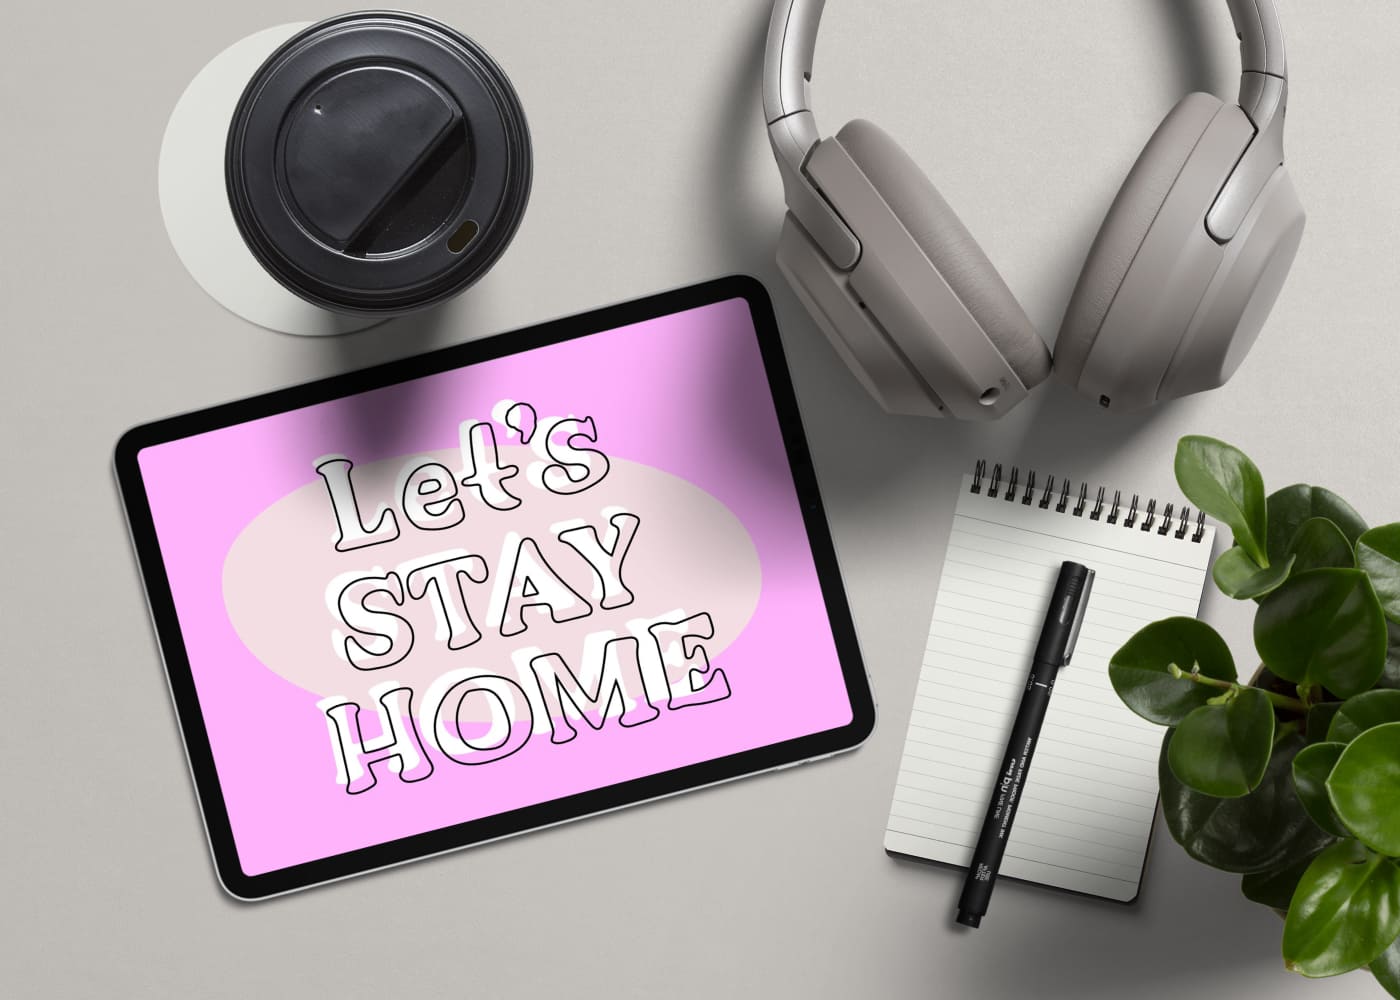 Cozy Outline - "Let's Stay Home" On The Tablet.